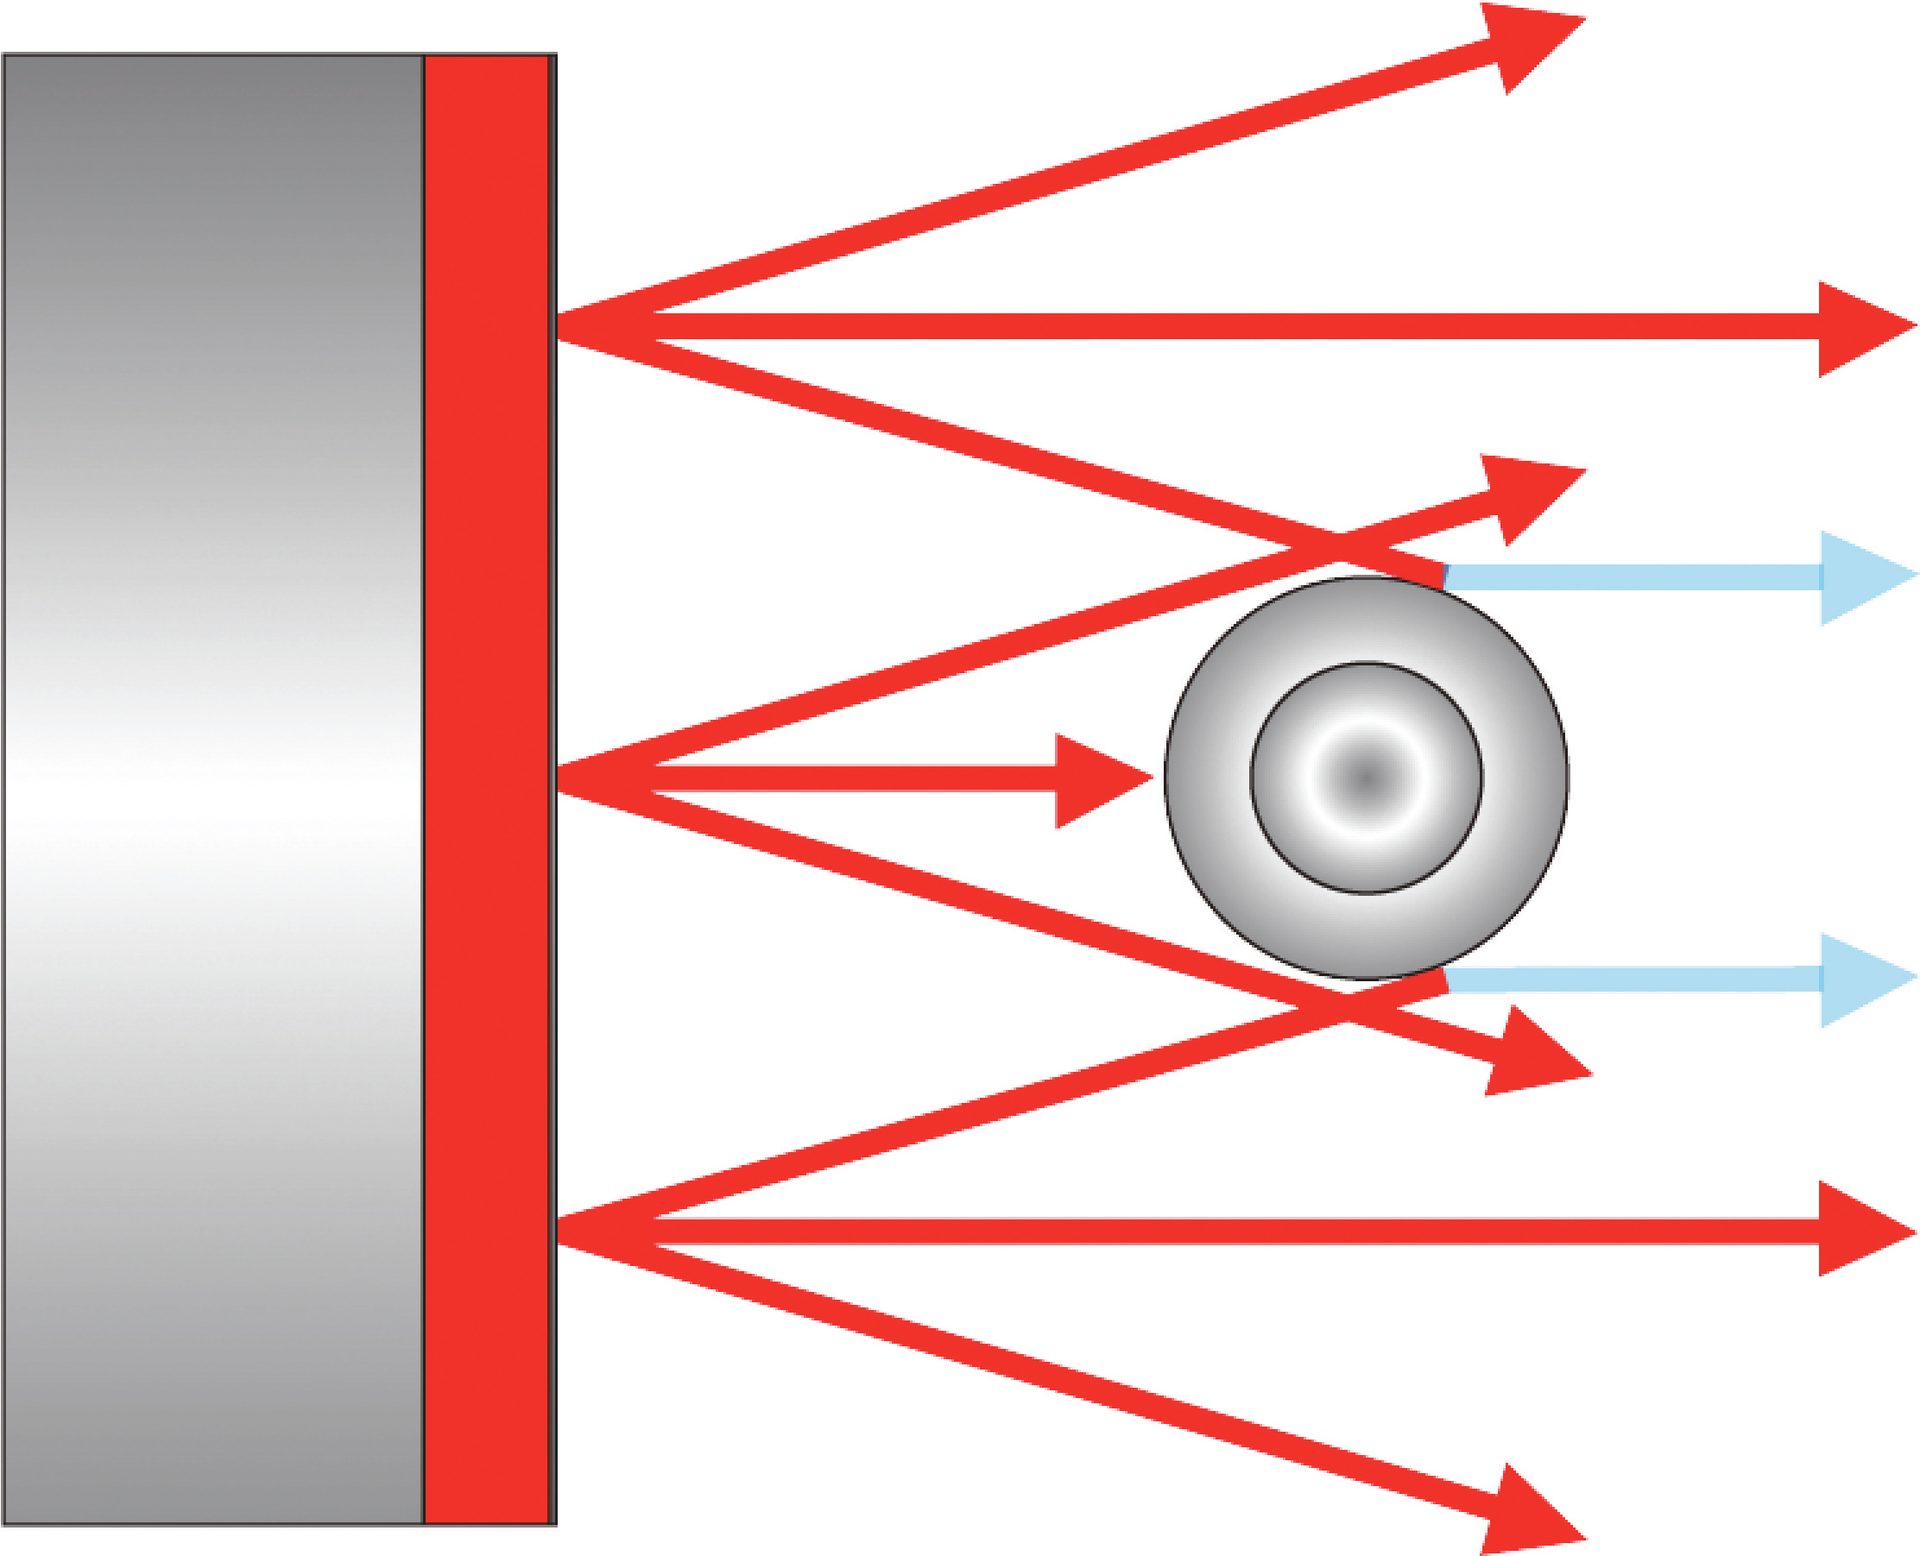 Figure 2. Diffuse backlight hitting an opaque object